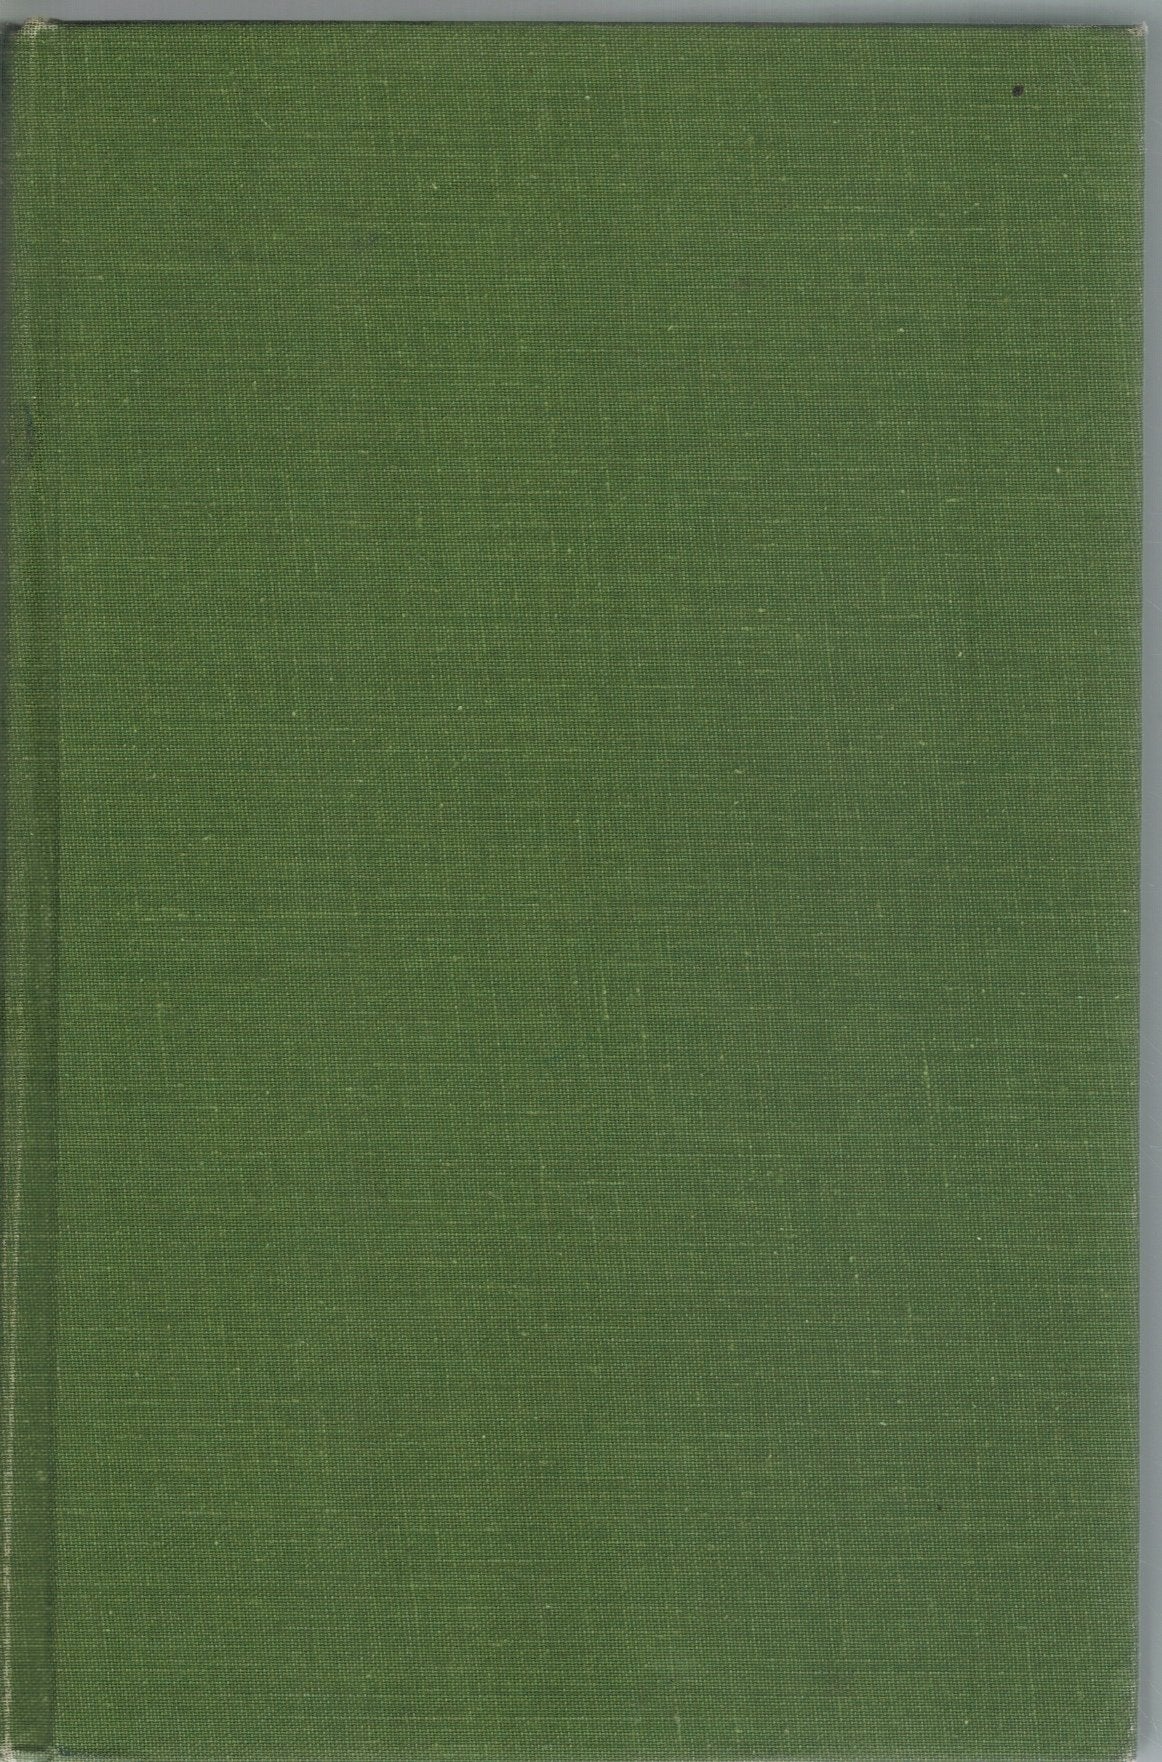 THE HISTORY OF UPSHUR COUNTY, WEST VIRGINIA From its Earliest Exploration  and Settlement to the Present Time  by Cutright, W. B